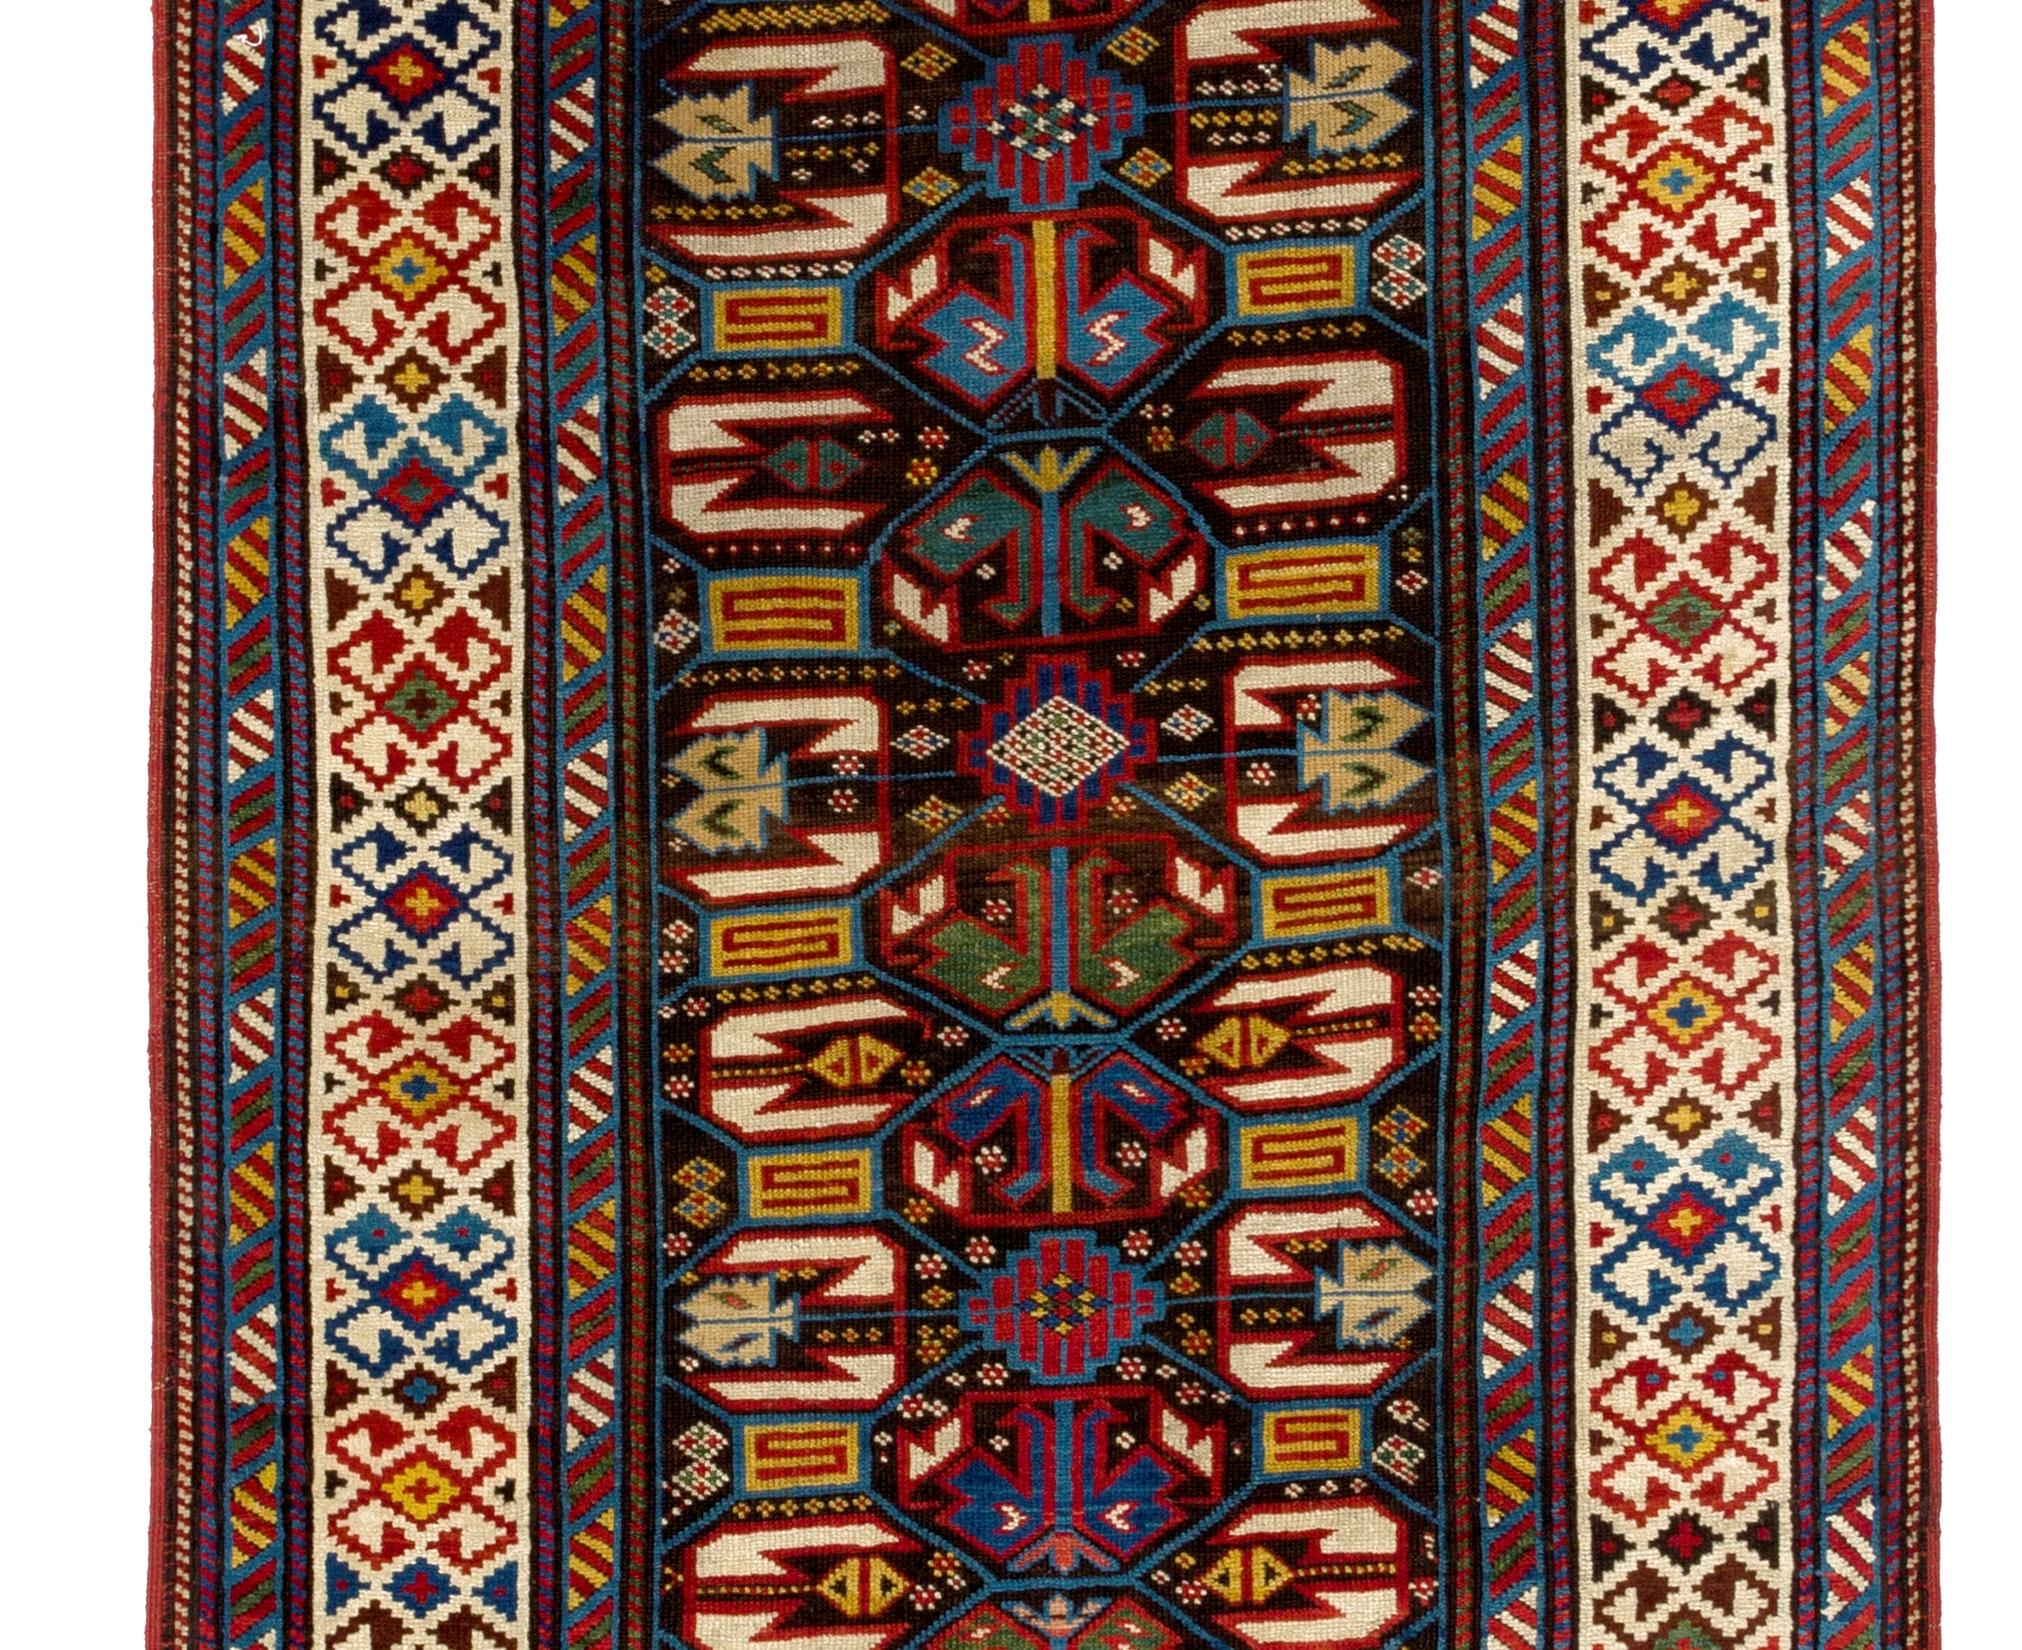 Antique Caucasian Kuba Dagestan runner. Top shelf collectors rug, circa 1870
All wool and natural dyes. Very good condition.